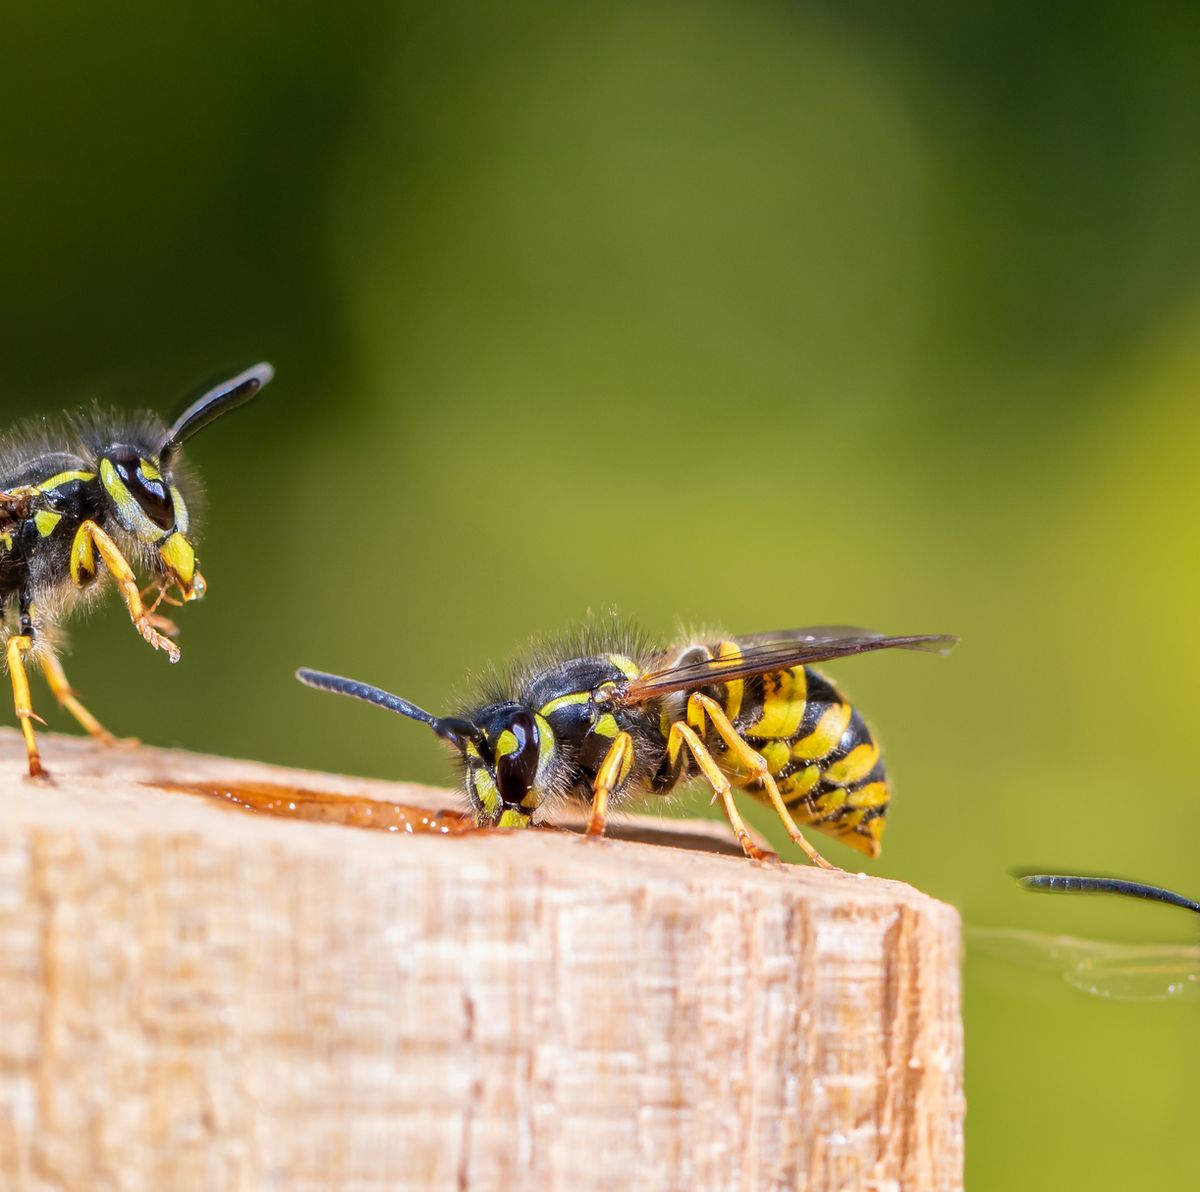 How to Prevent and Get Rid of Wasps Near Your Home and Garden